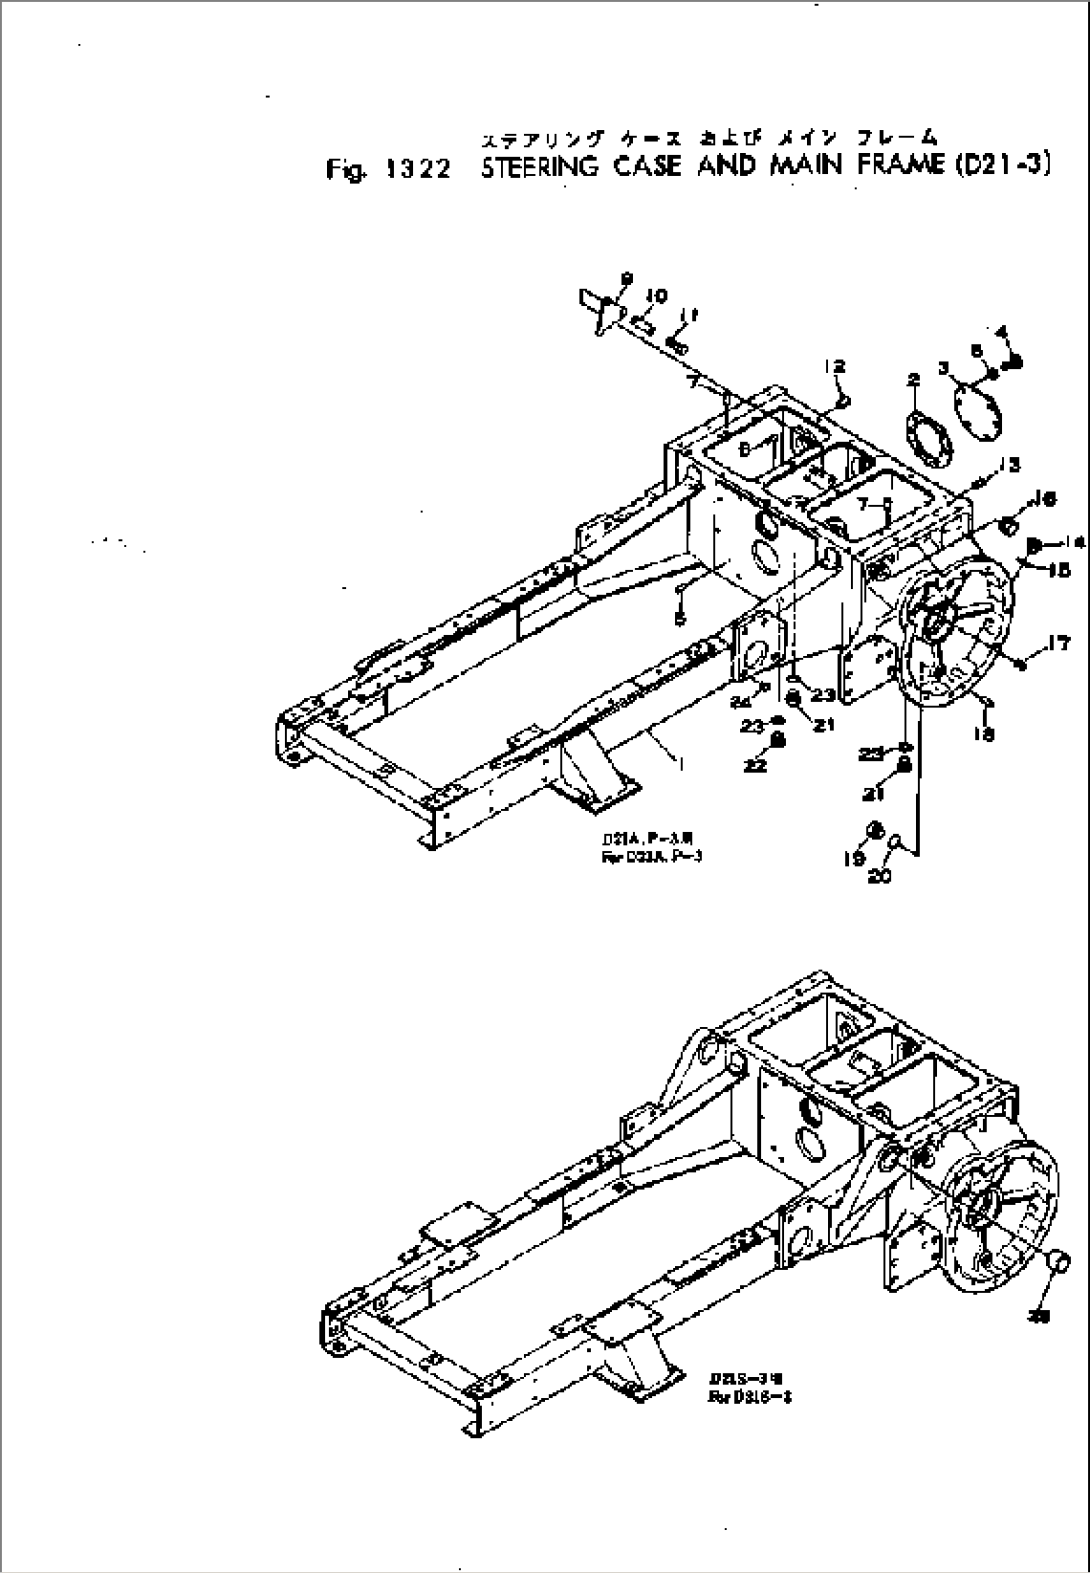 STEERING CASE AND MAIN FRAME